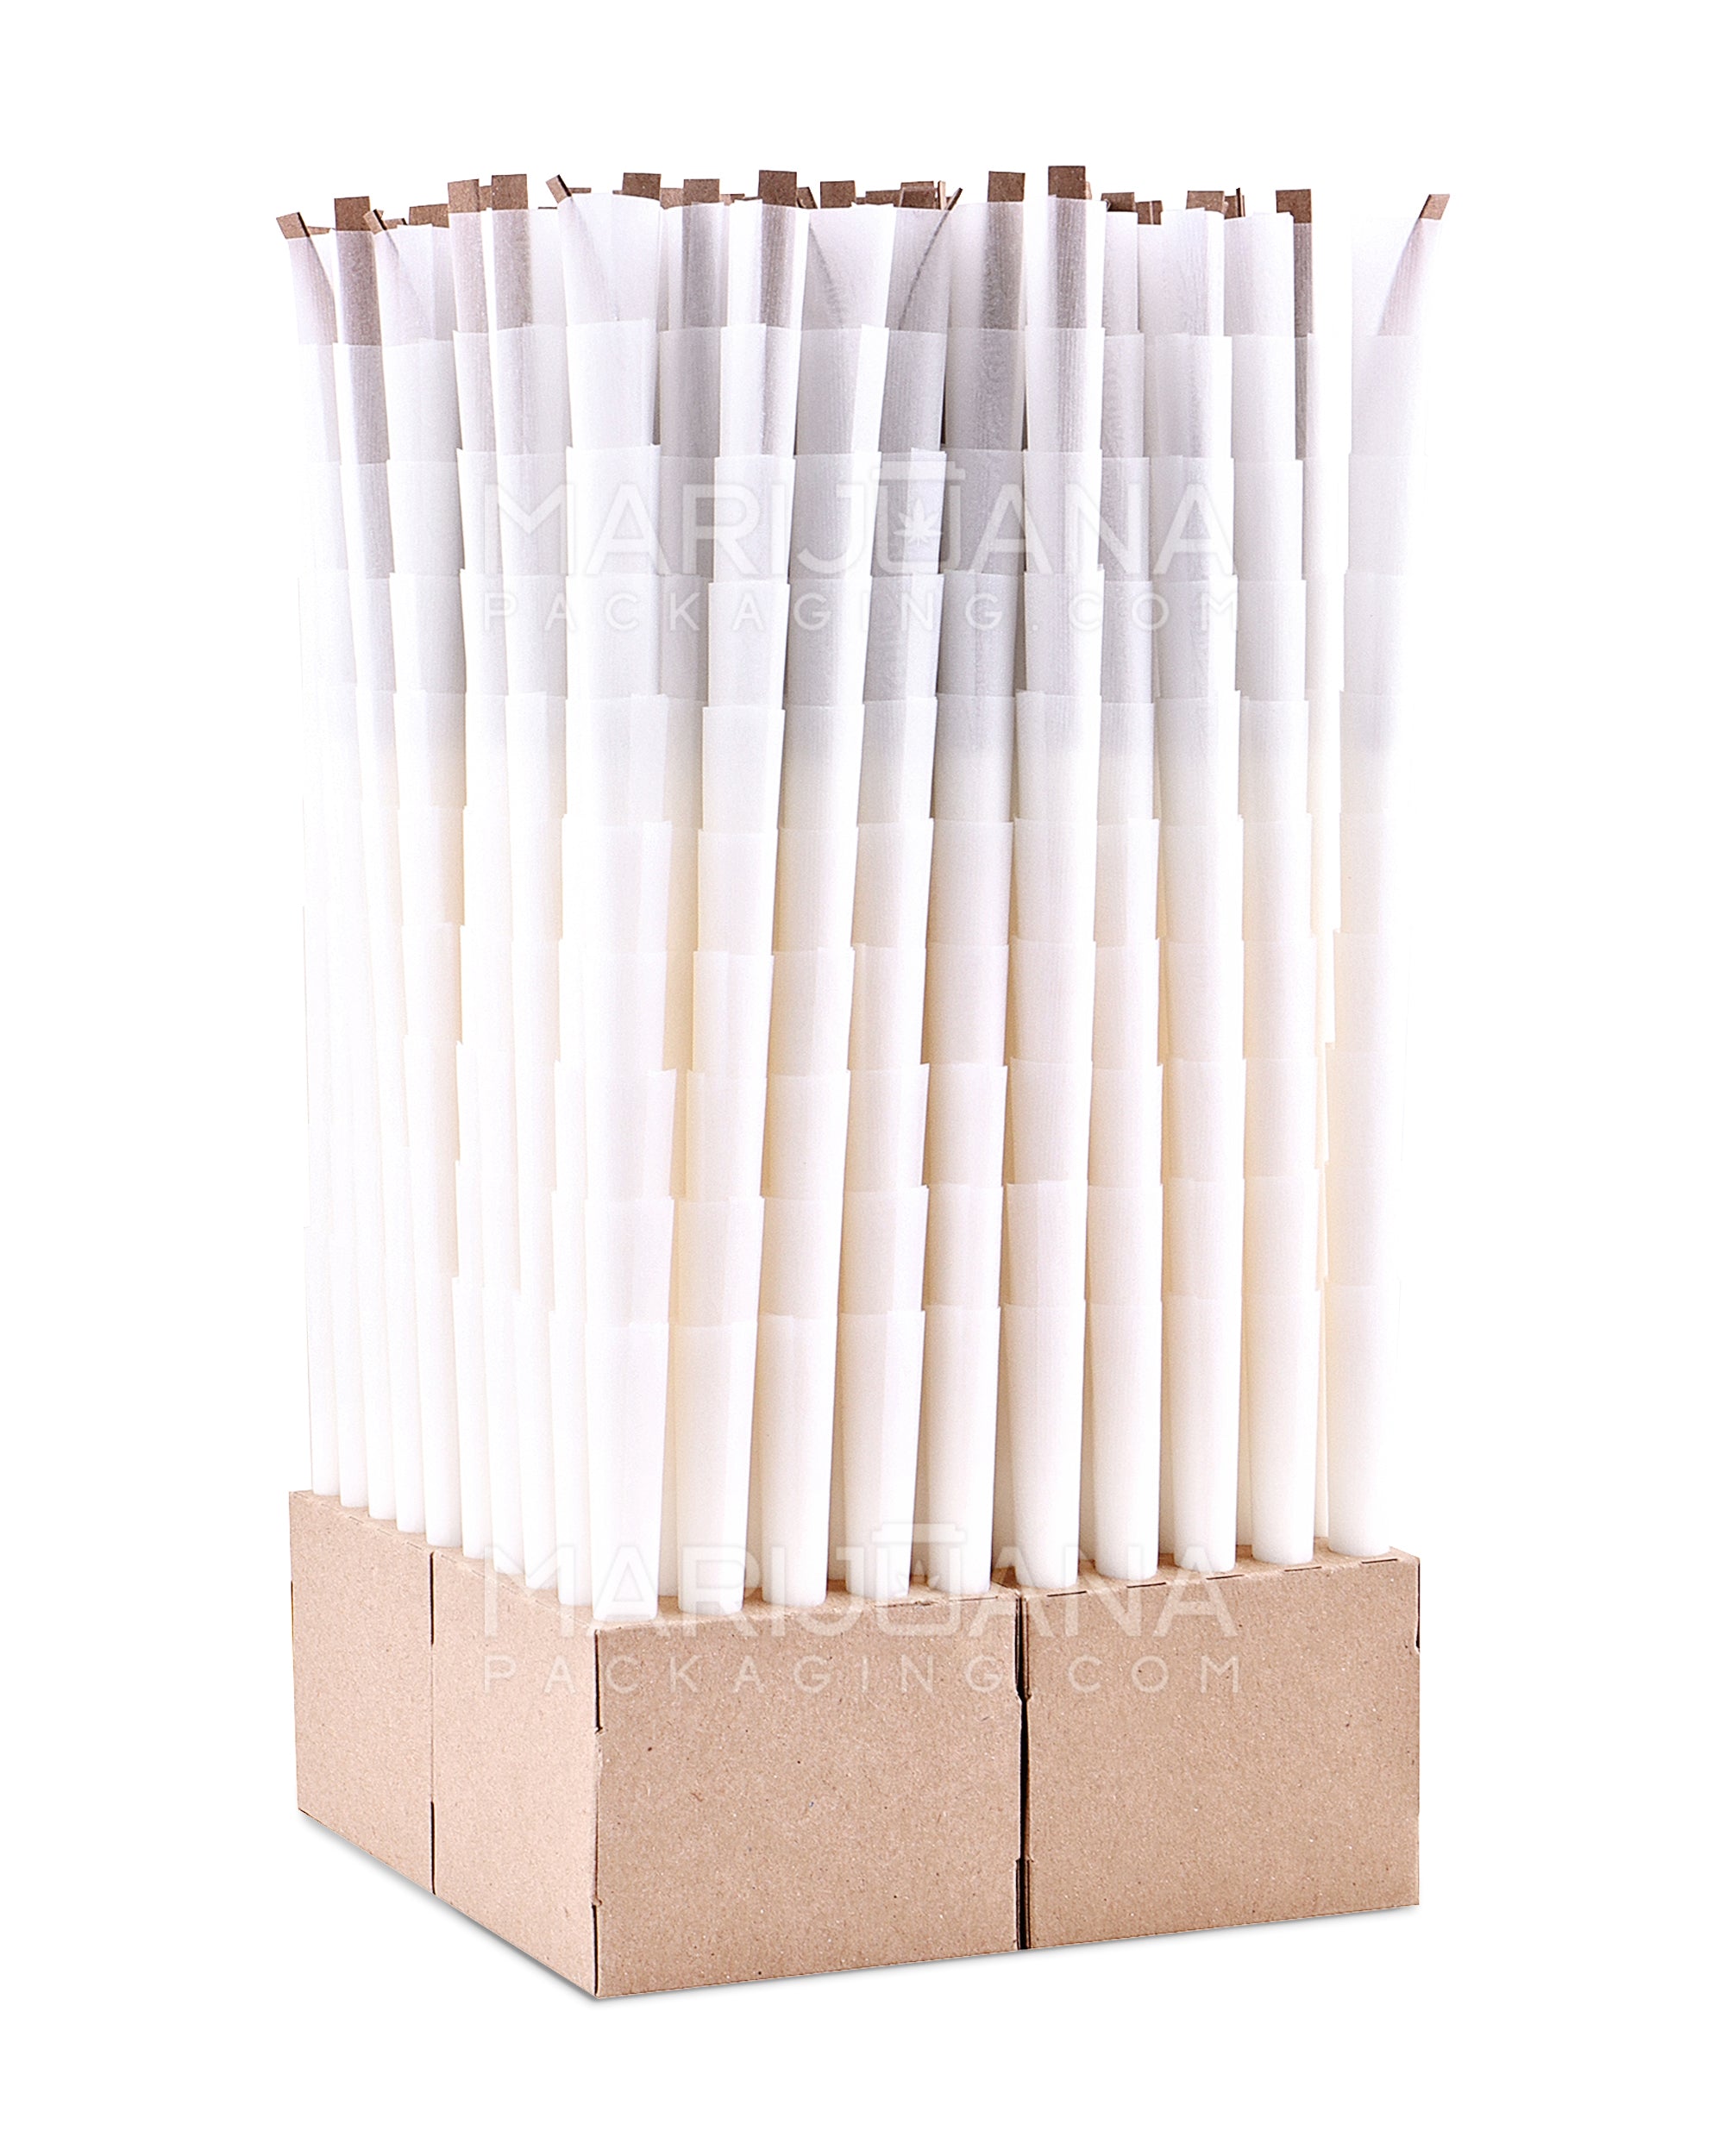 CONES | King Size Pre-Rolled Cones | 109mm - Bleached Paper - 1000 Count